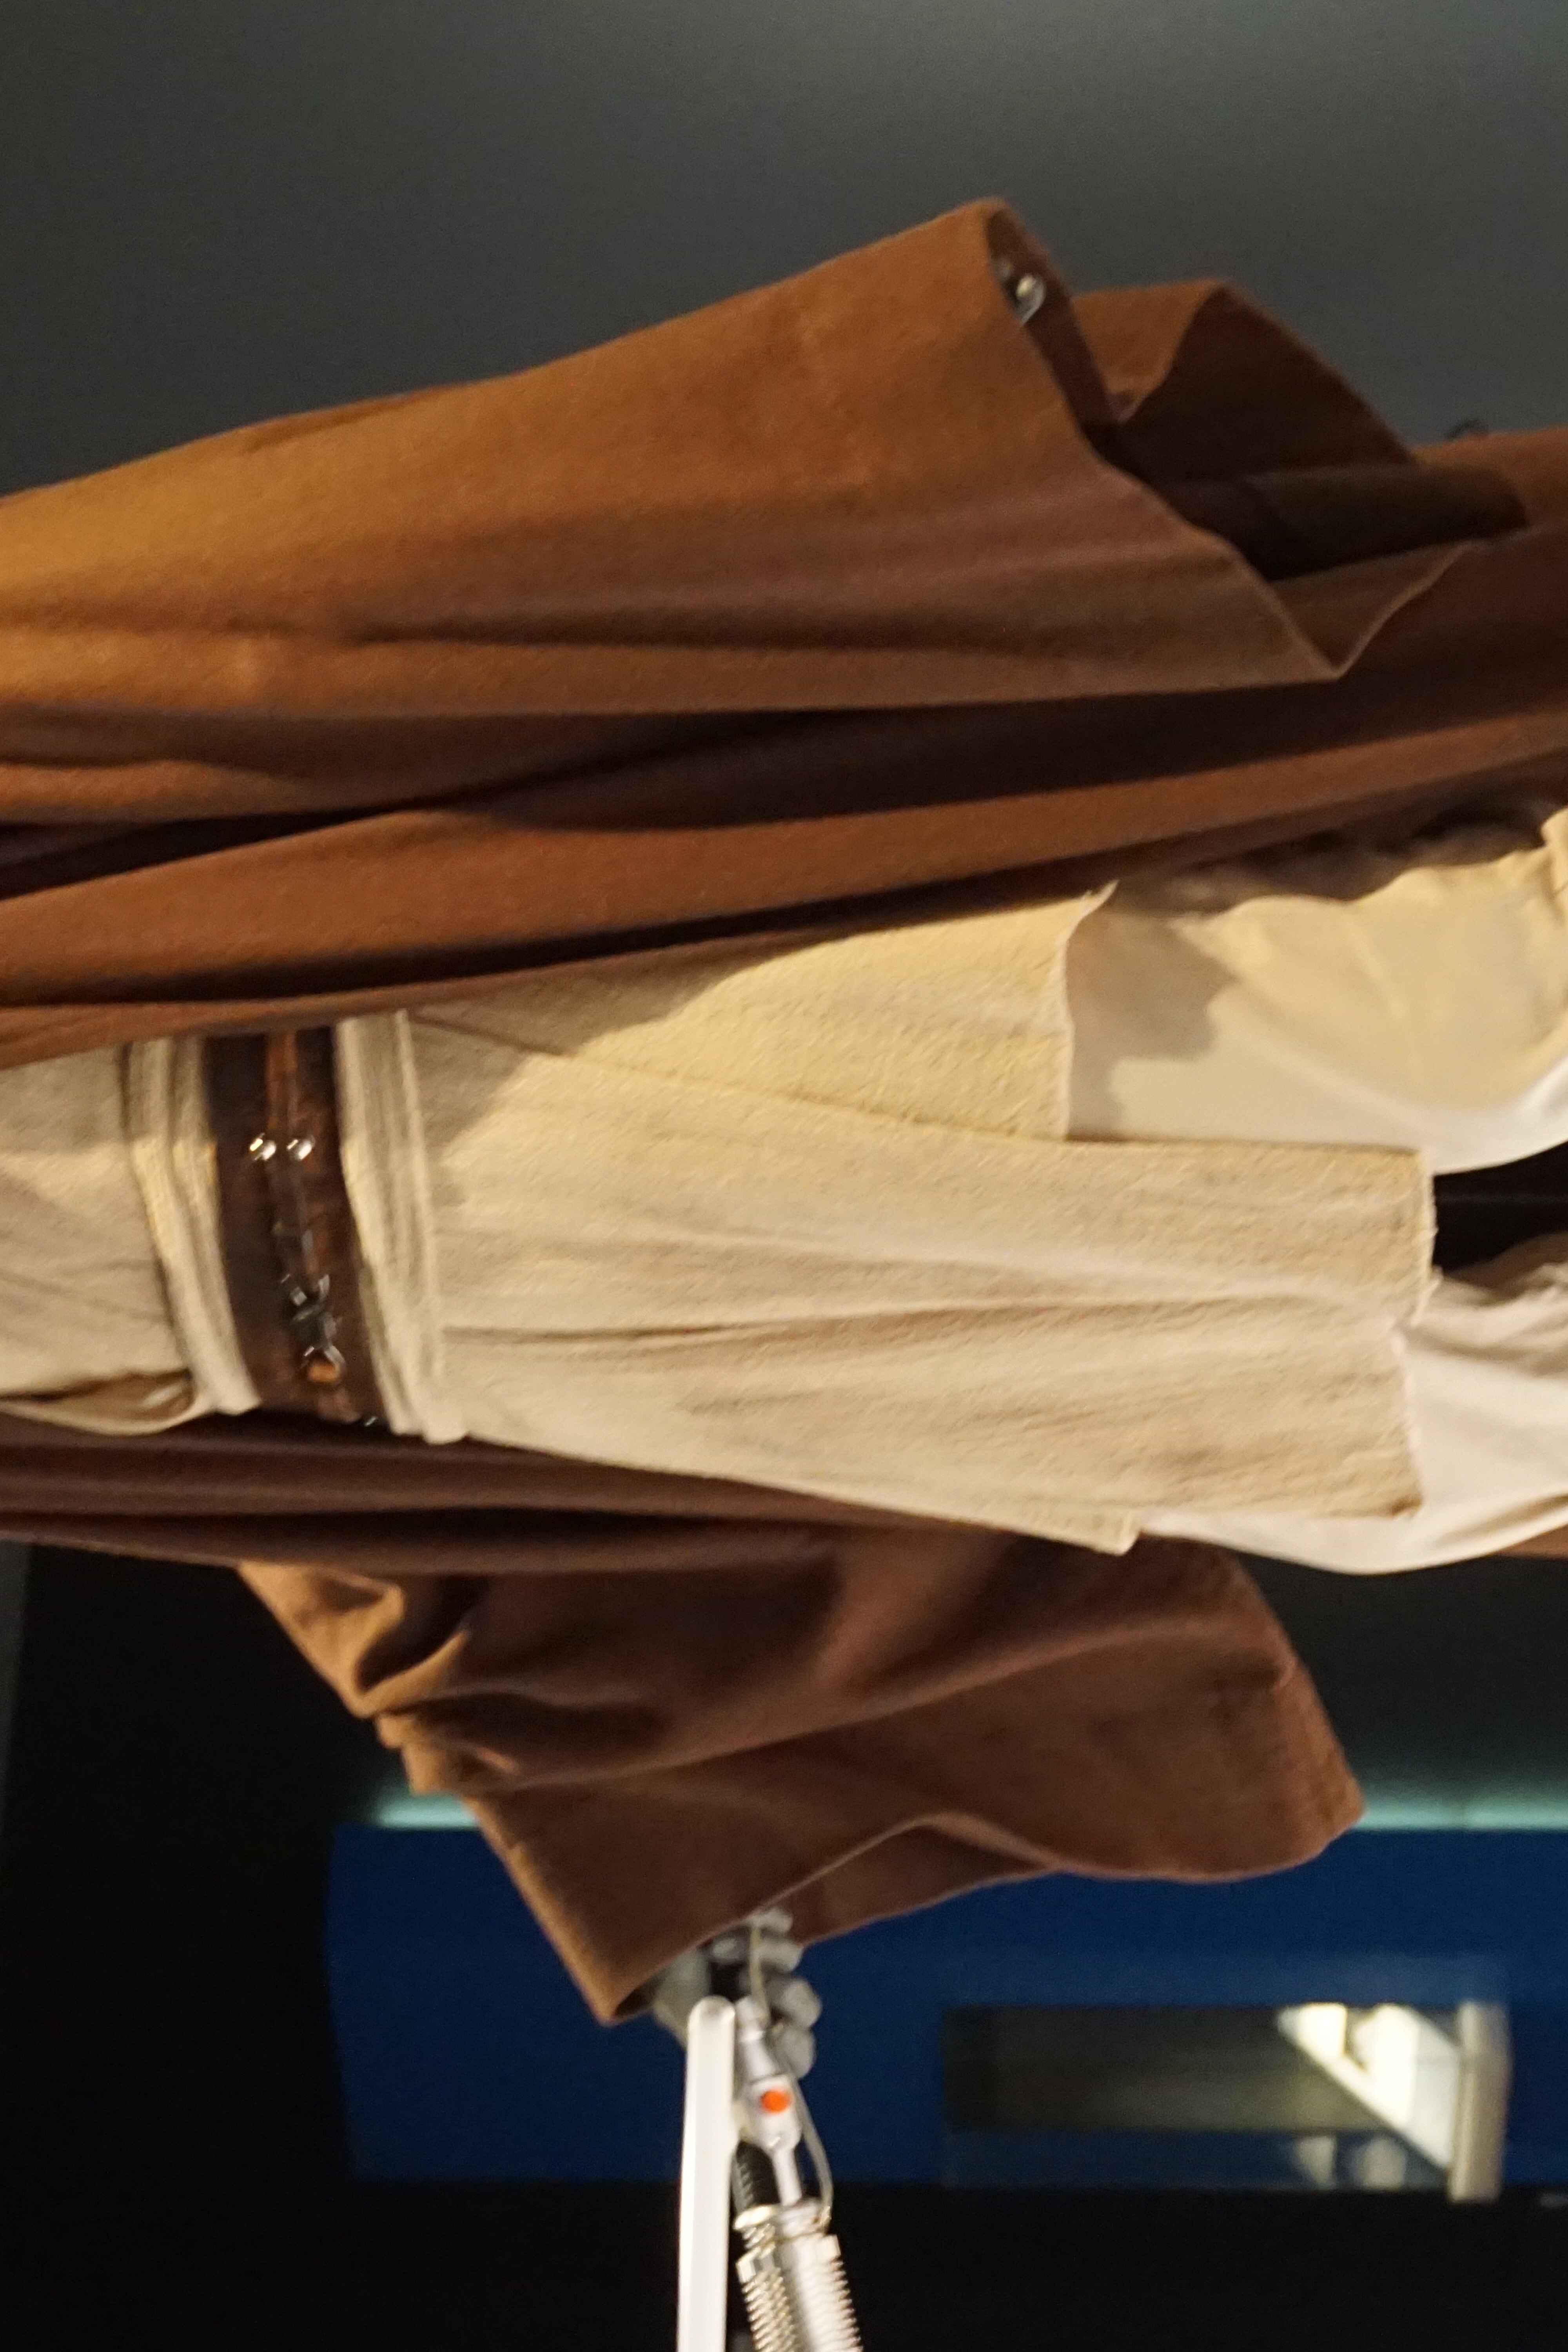 File:Star Wars and the Power of Costume July 2018 04 (Obi-Wan Kenobi's Jedi robes from Episode I).jpg - Wikipedia